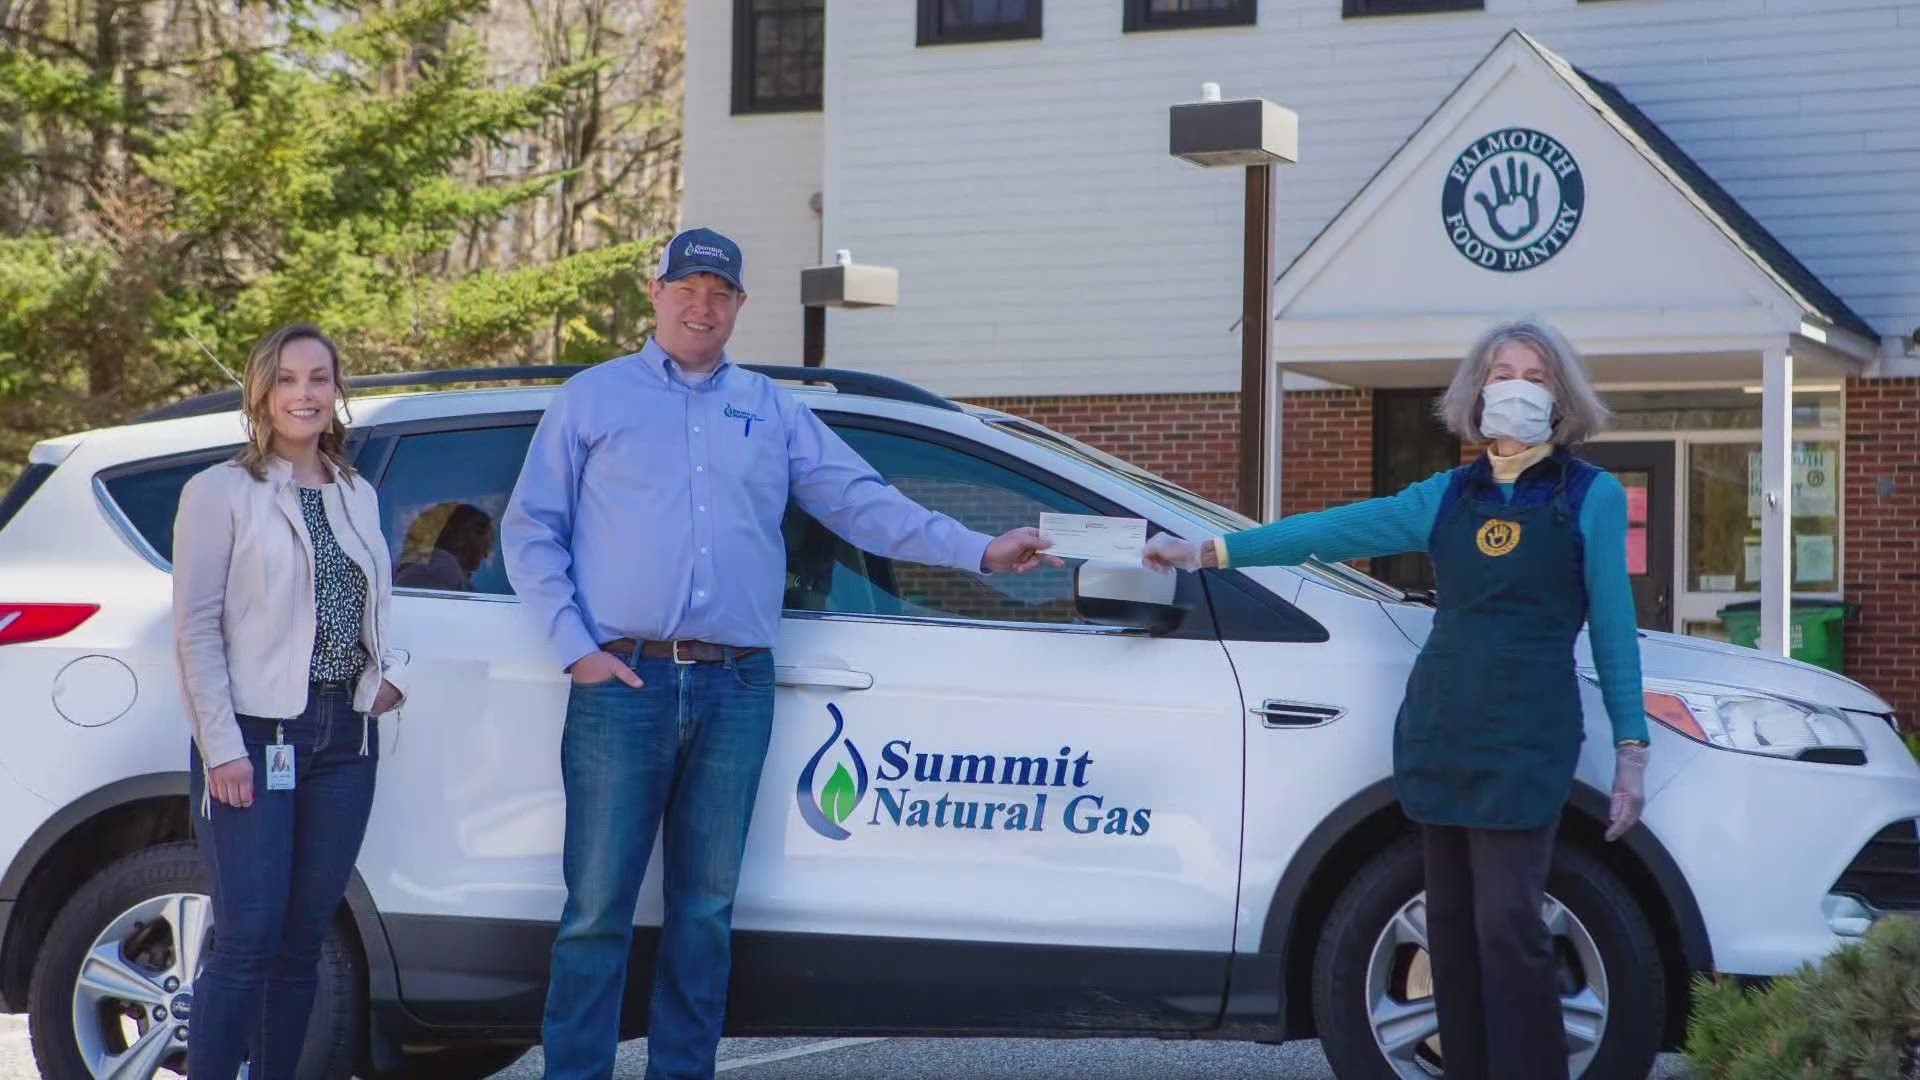 When COVID-19 hit Maine, Summit Gas redirected its fundraising to help those affected.